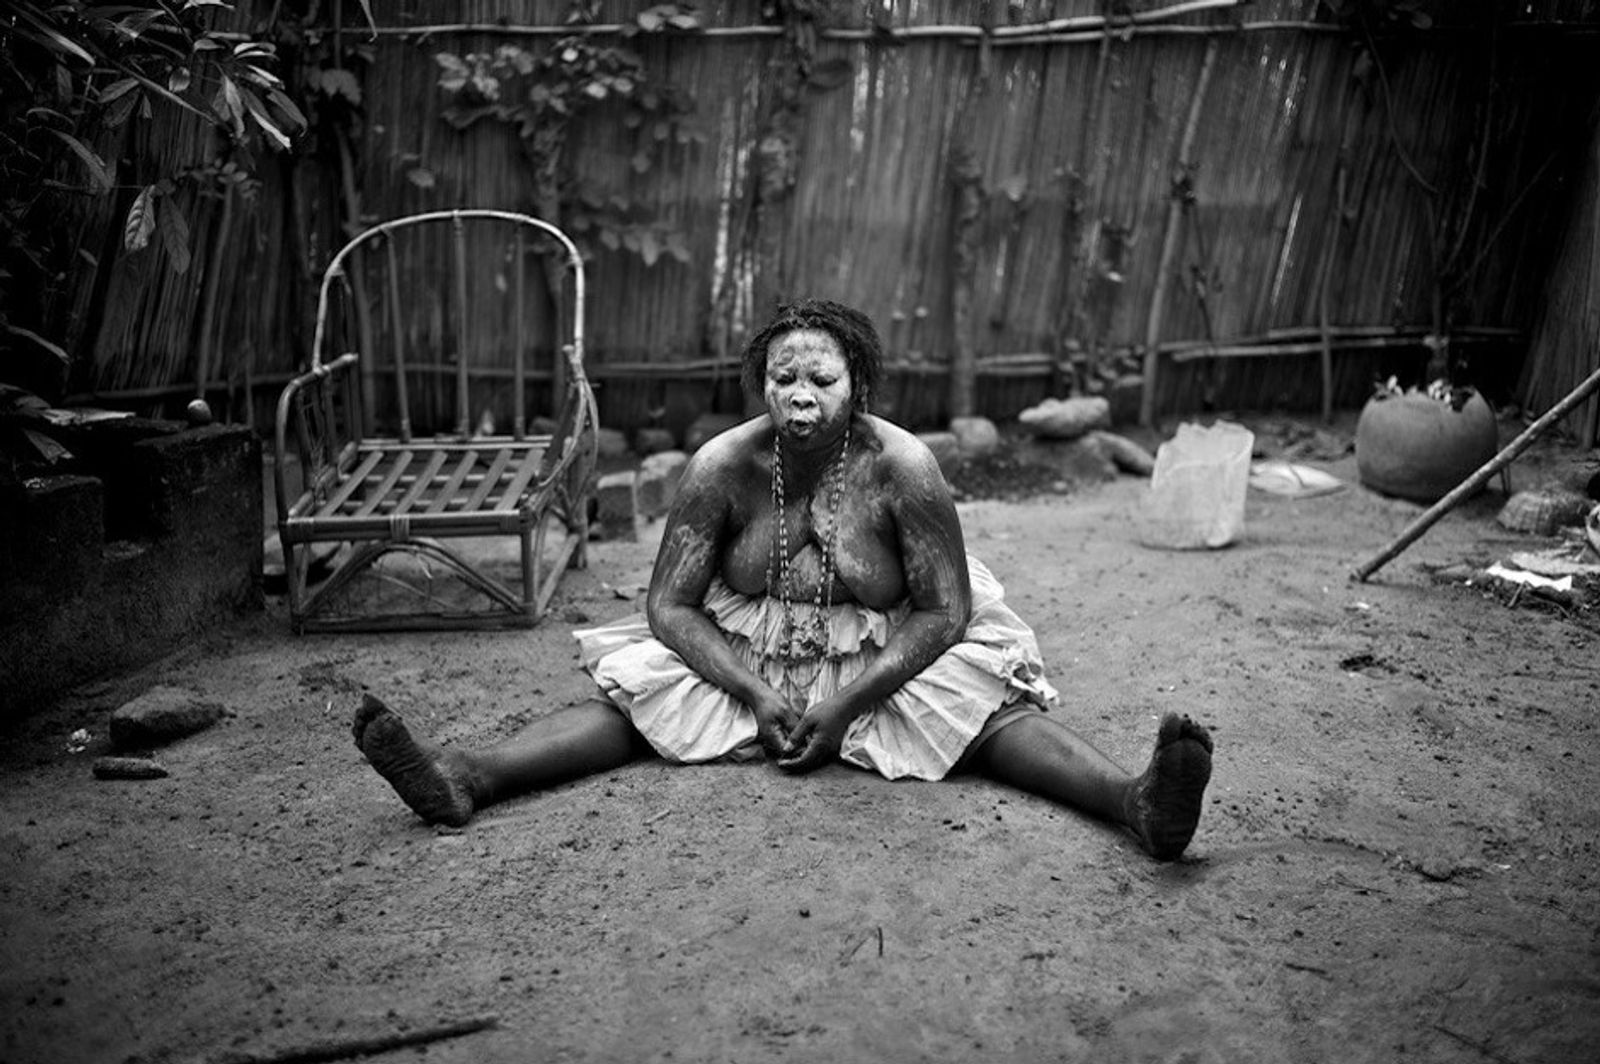 © Frederic Vanwalleghem - Image from the 'Vodun, trying to grasp the ungraspable' photography project